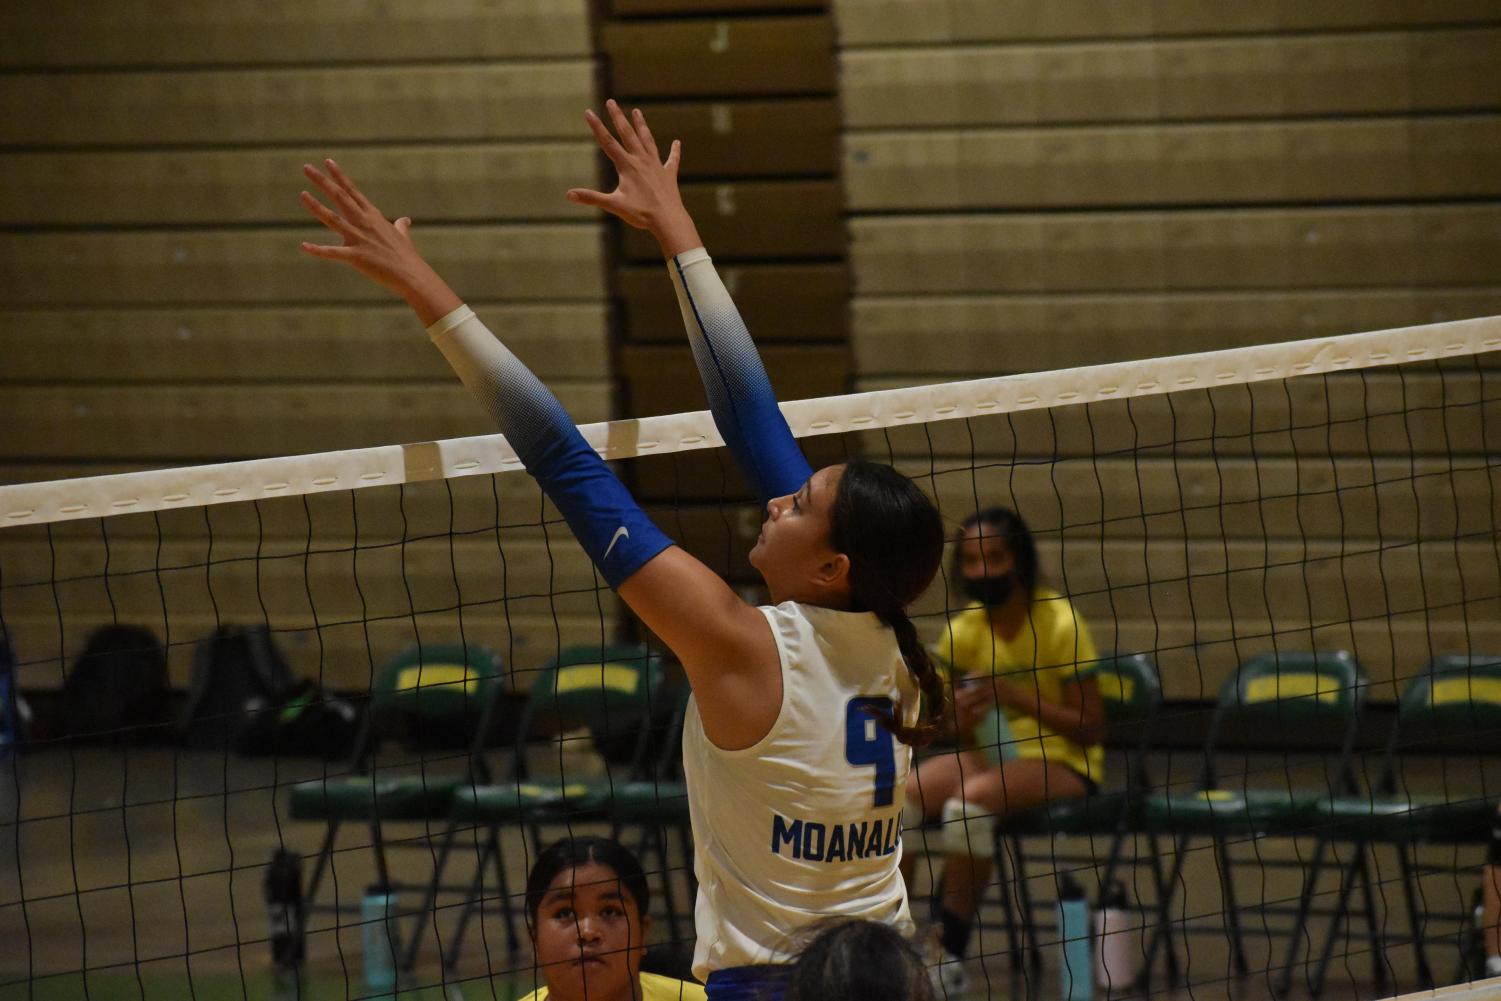 Ryson+Lum+charges+after+a+Leilehua+player+at+the+Sept.+9+Homecoming+game.+Moanalua+is+ranked+tenth+in+the+state.